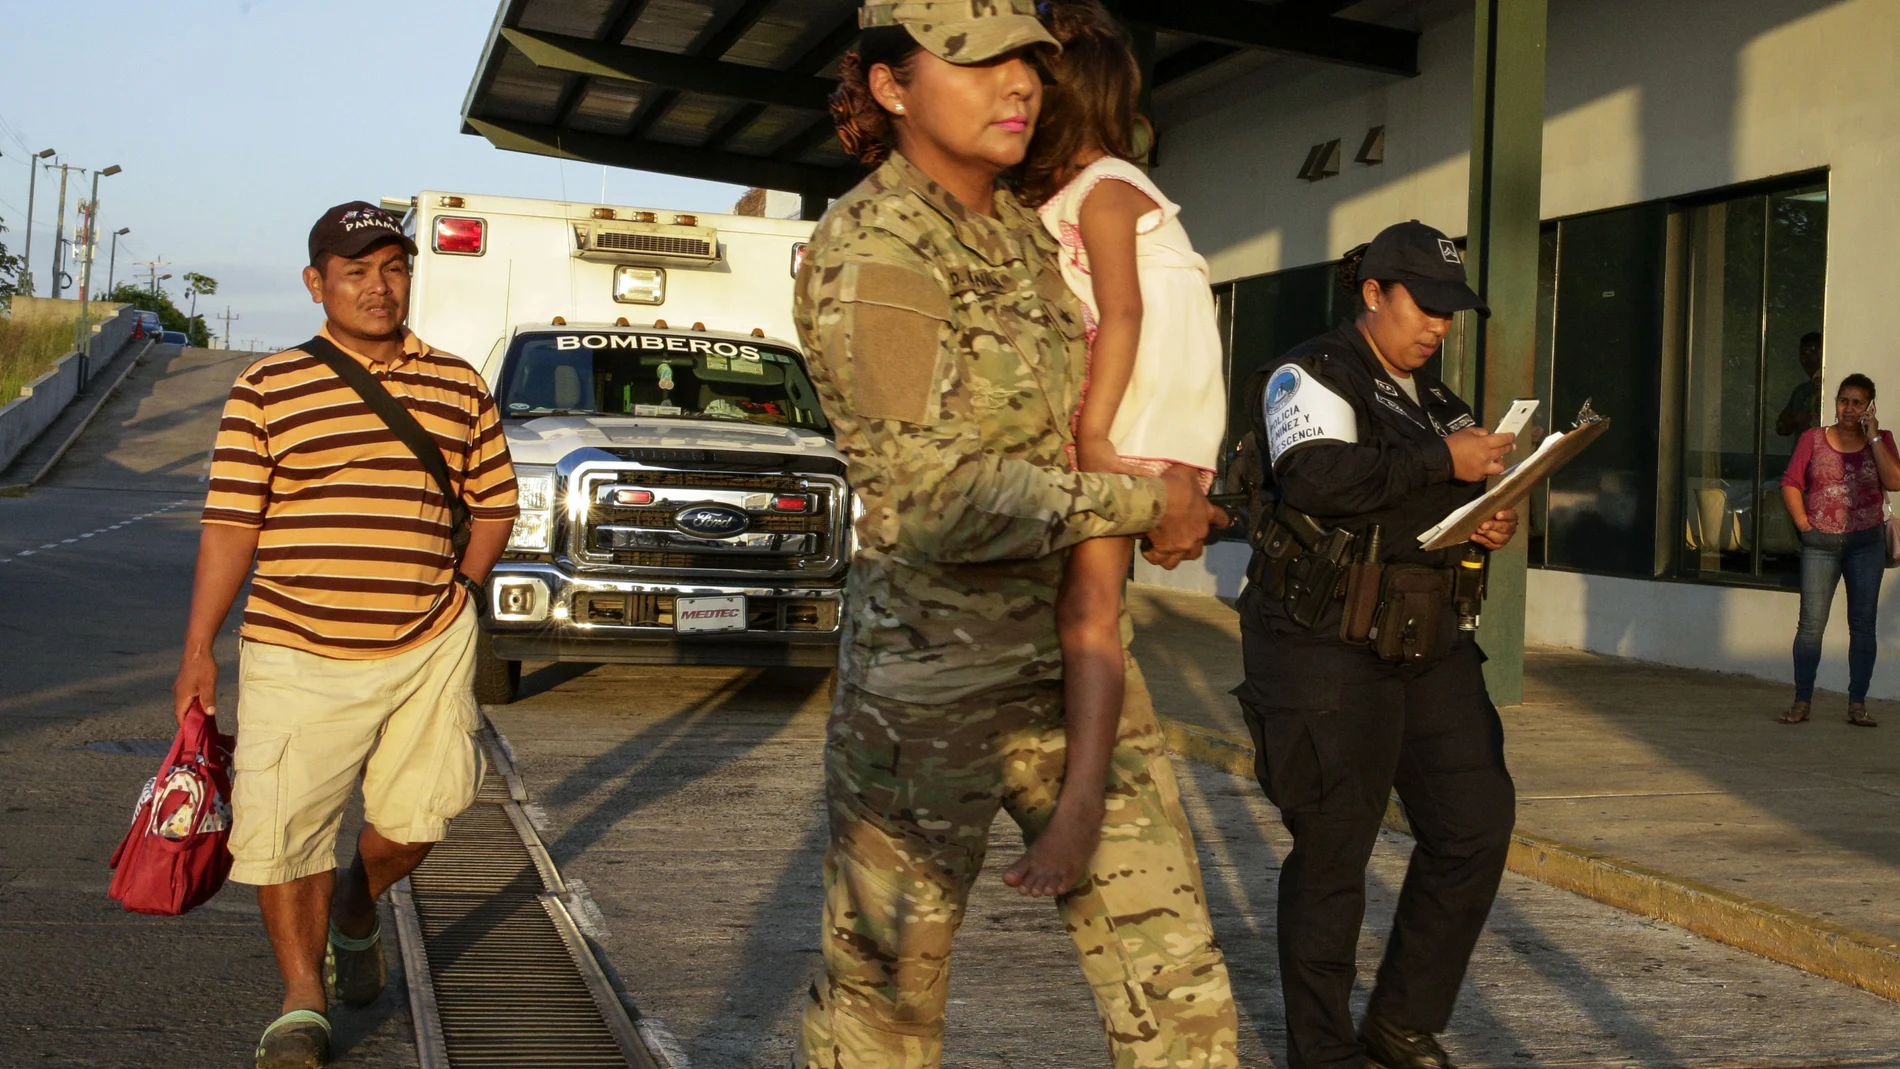 FILE - Jose Gonzalez, left, follows his 5-year-old daughter, carried by a police officer, as they leave a hospital in Santiago, Panama, Thursday, Jan. 16, 2020. Gonzalez's wife and five of their children are among seven people killed in a religious ritual in the Ngabe Bugle indigenous community. On Saturday, Nov. 20, 2021, a jury of conscience convicted seven members of a religious sect accused of murdering a woman and six minors as part of a cult in a remote indigenous area of â€‹â€‹the Panamanian Caribbean in early 2020, a tragedy that strongly shook the country. (AP Photo/Arnulfo Franco, File)